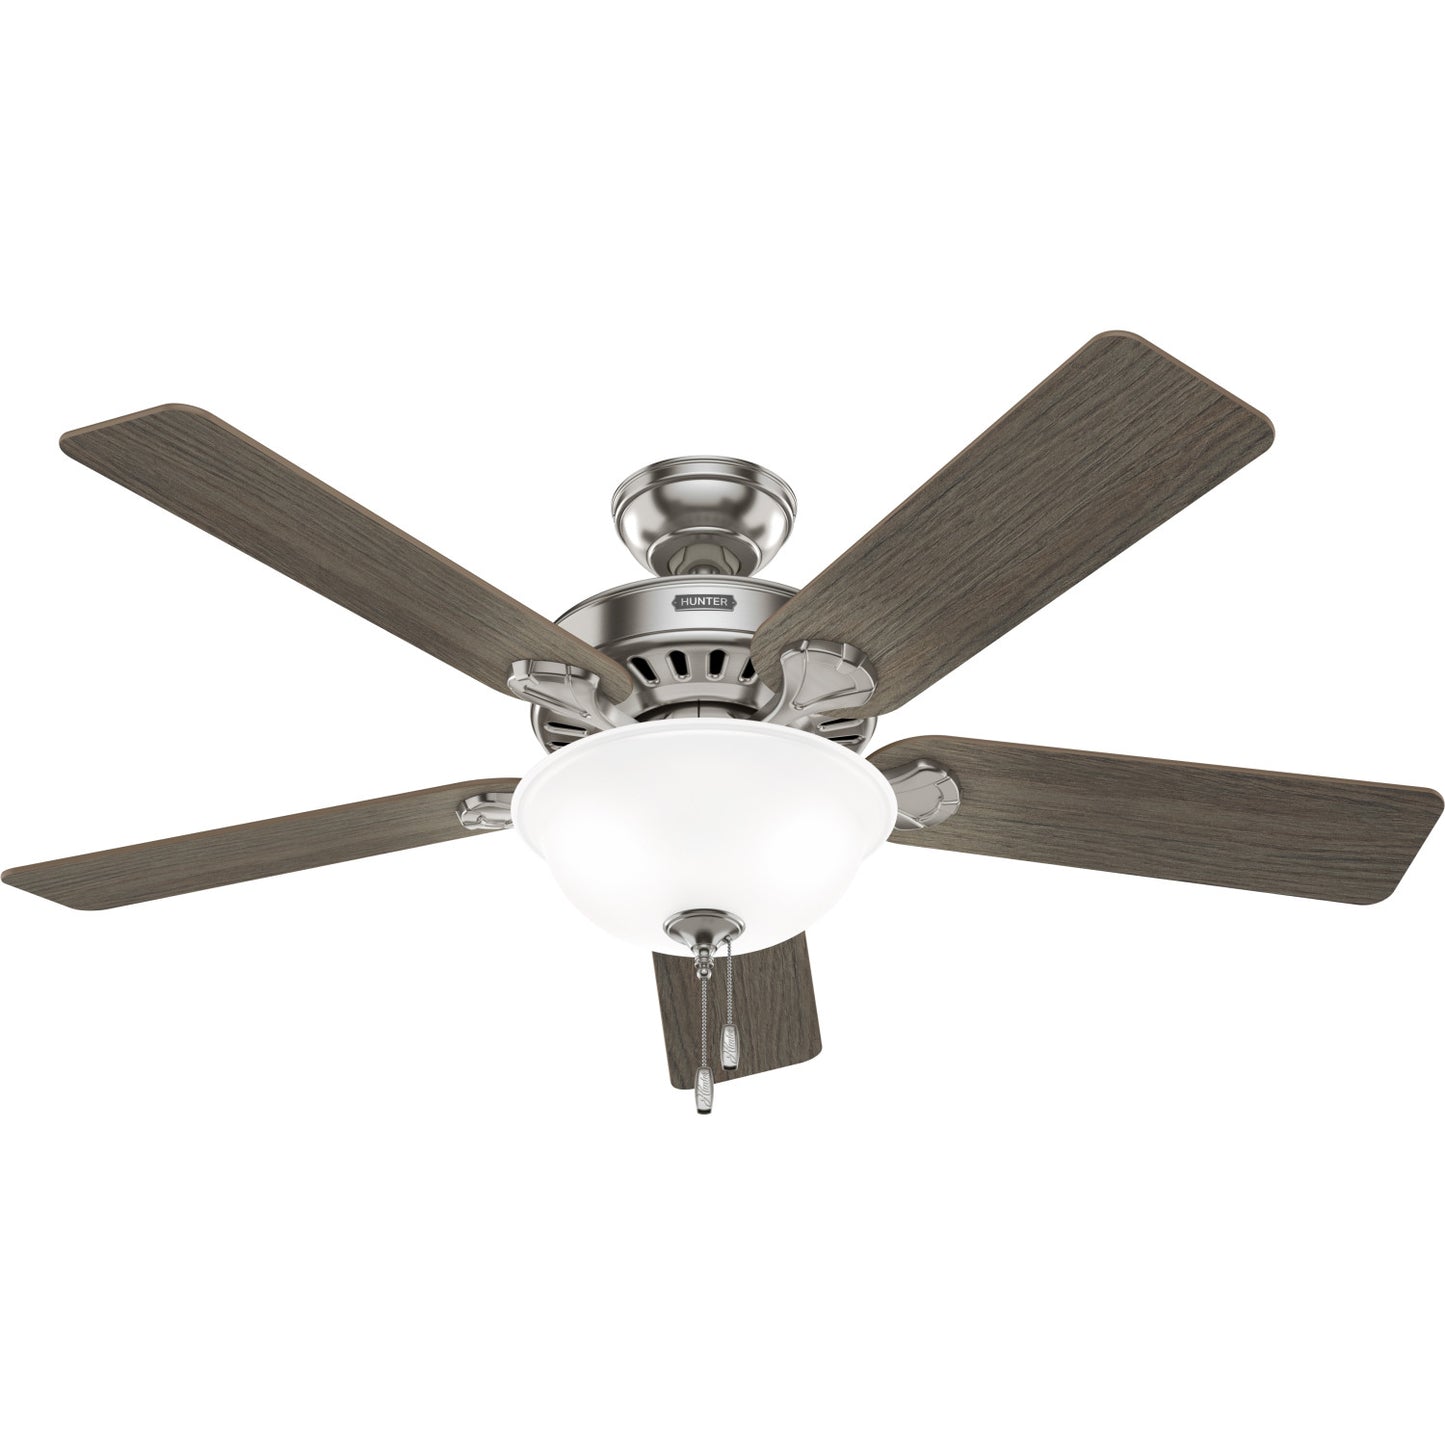 Pro's Best ENERGY STAR DC with Light 52 inch Ceiling Fans Hunter Brushed Nickel - Greyed Walnut 